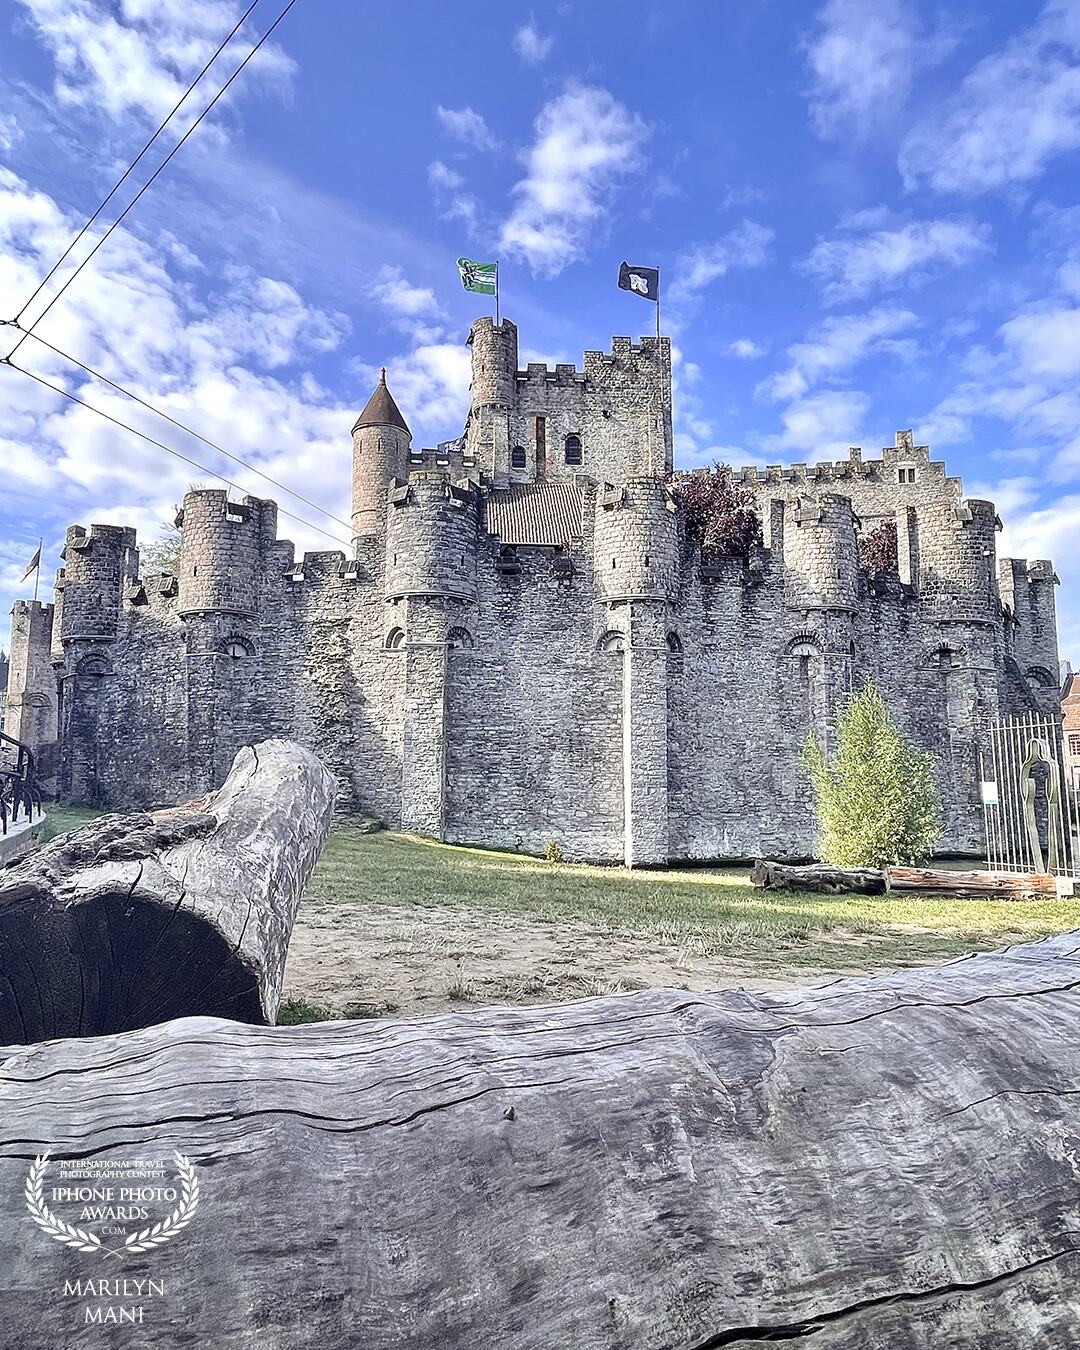 Ghent had my heart! The Gravensteen castle (origins dating back year 800-960) in Ghent, Belgium, has an interesting tale and is a beautiful structure inside and out. If you ever visit there take the self guided audio tour, one of the most entertaining ones I’ve ever heard!